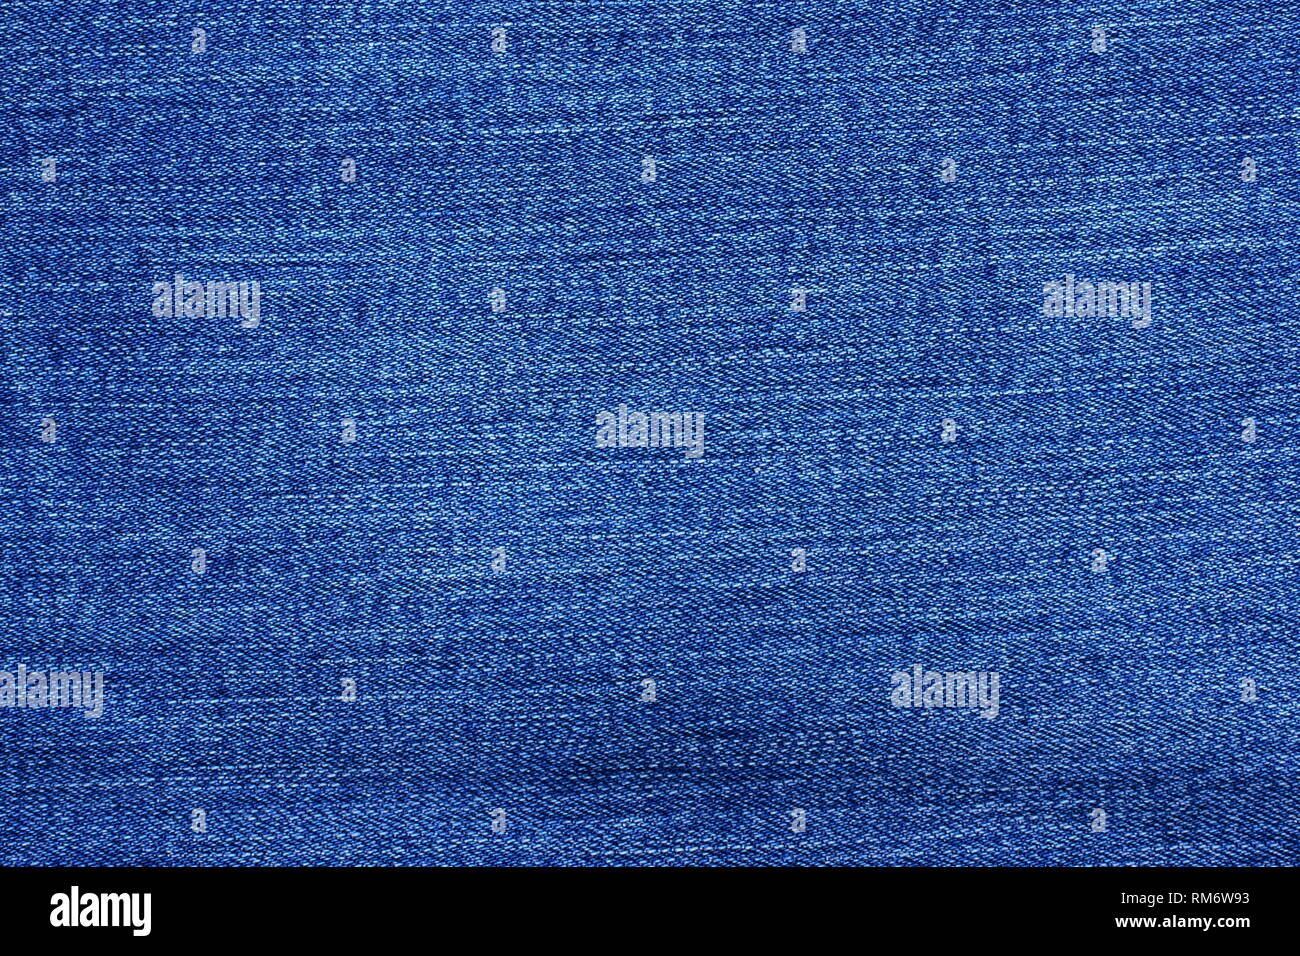 Blue jeans. Textile background for design purposes with copy space. Stock Photo